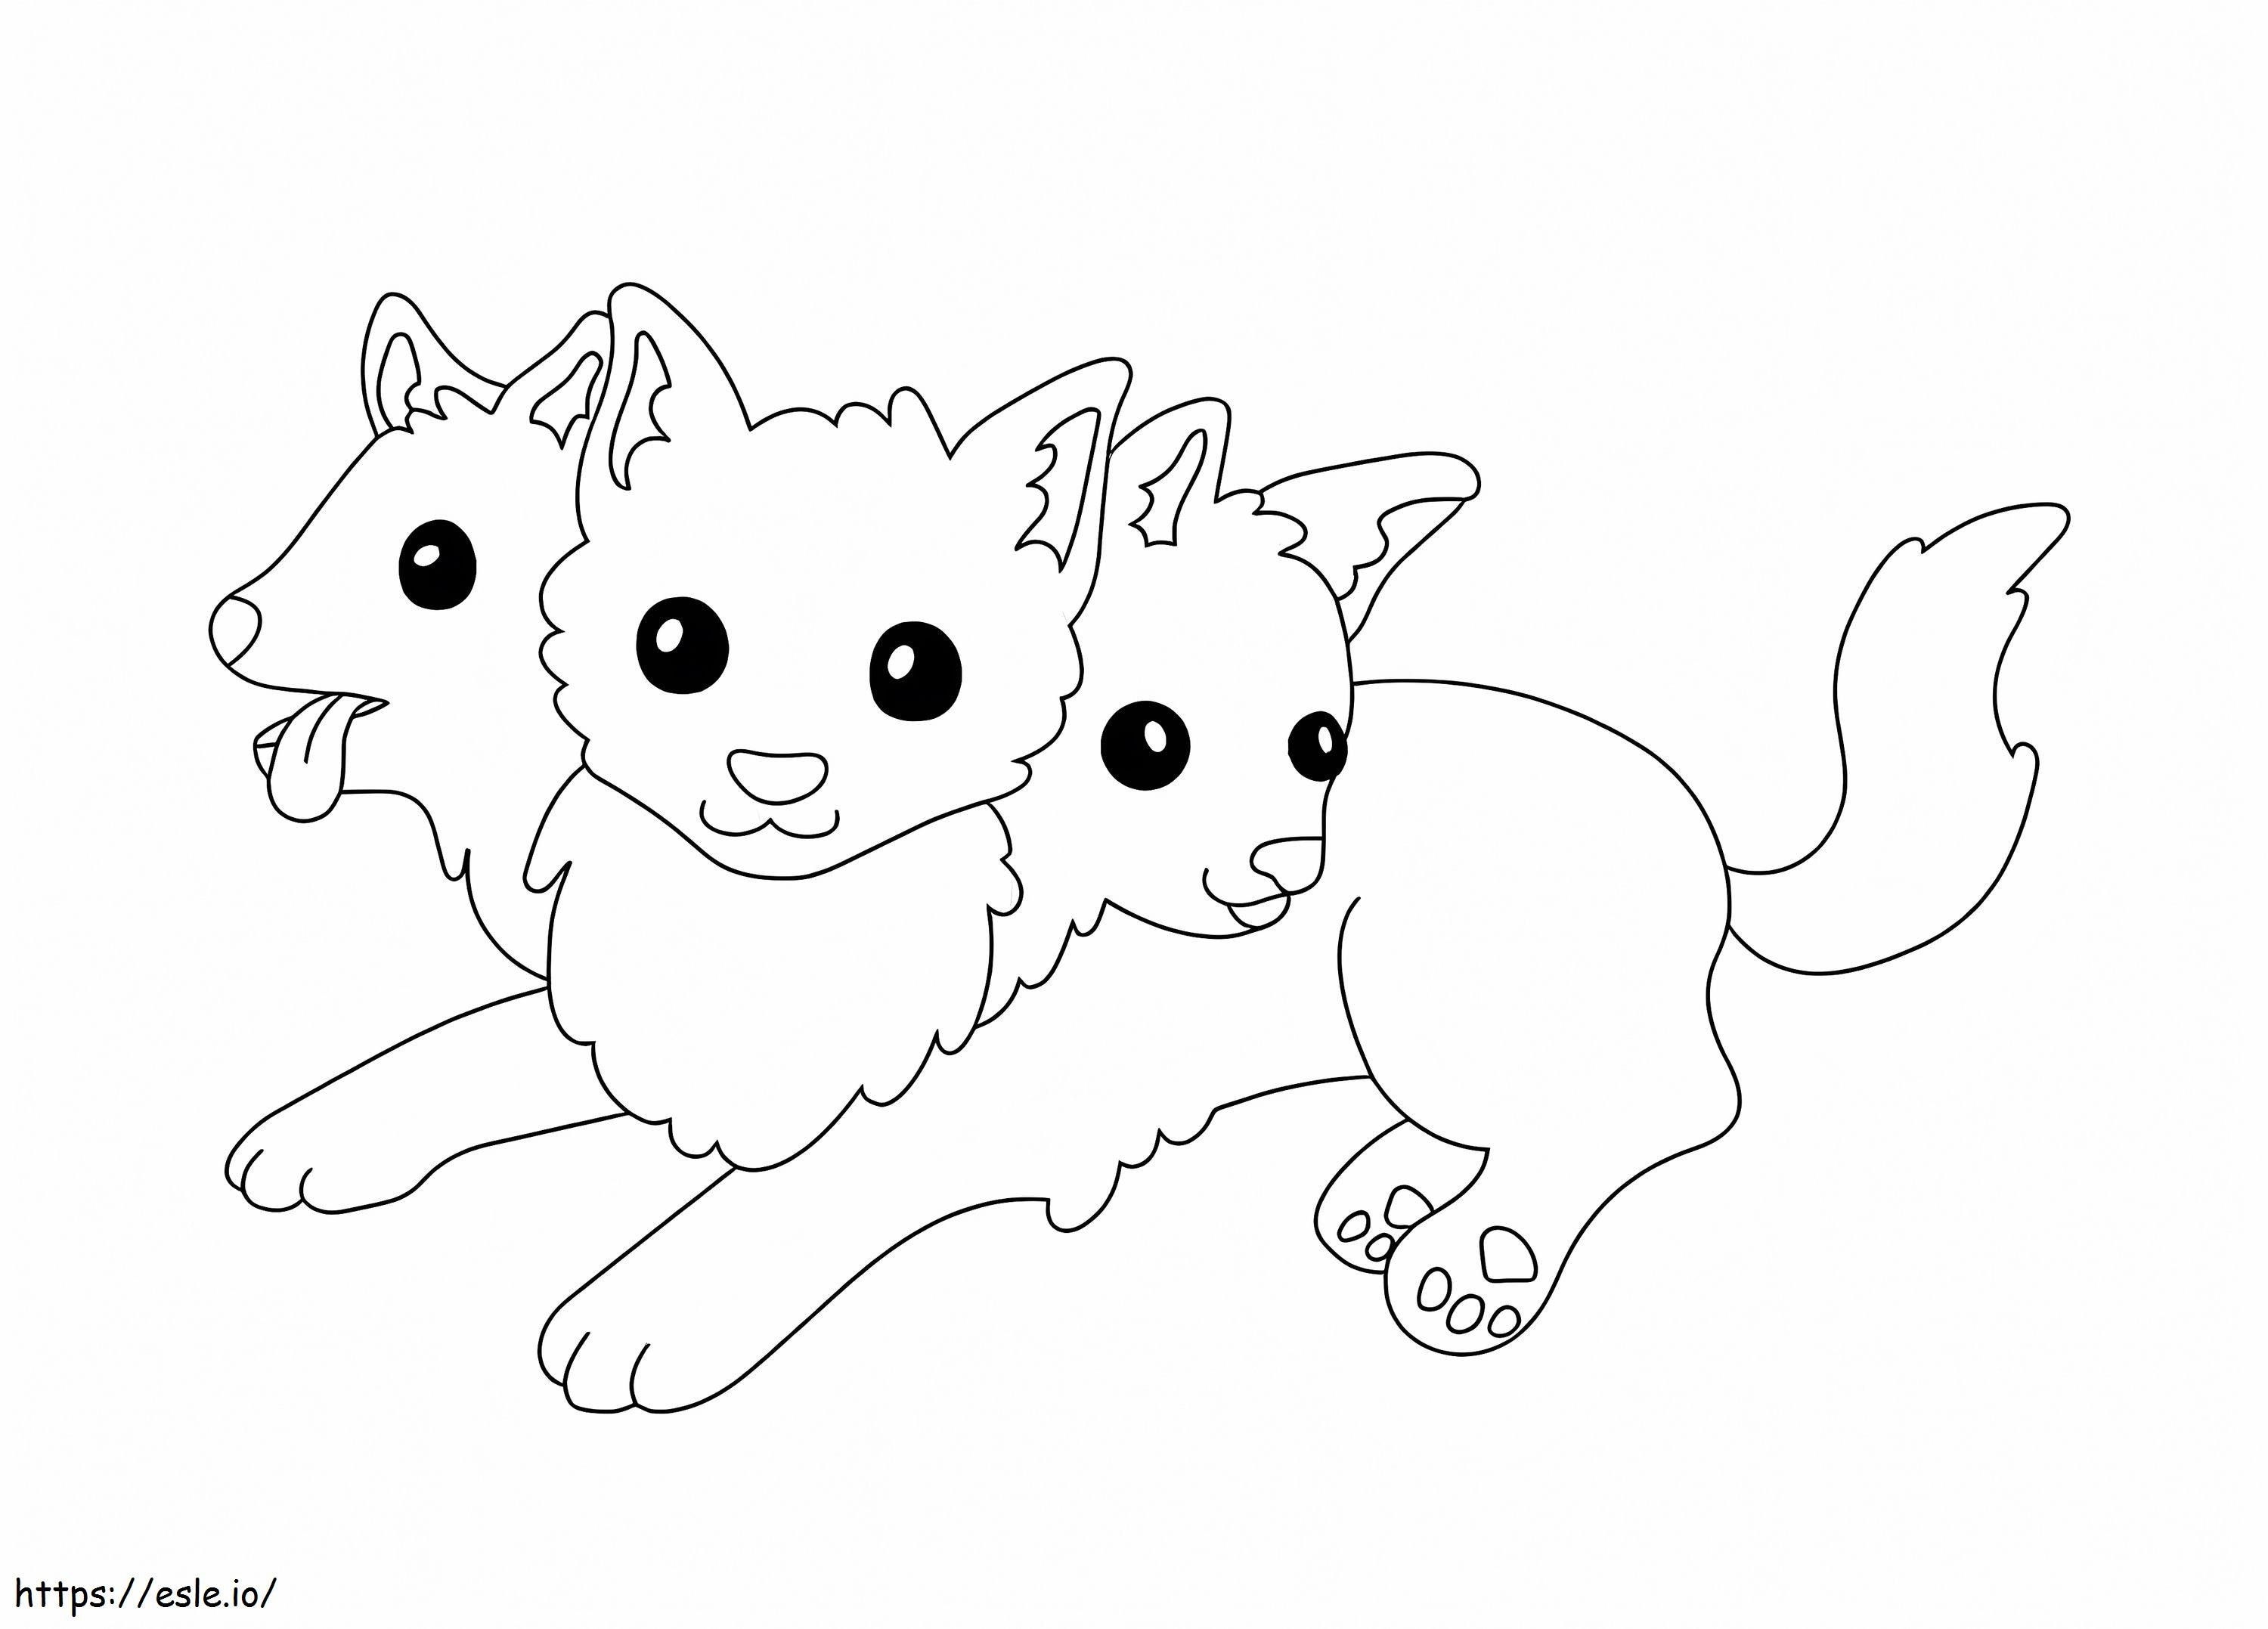 Charming Cerberus coloring page